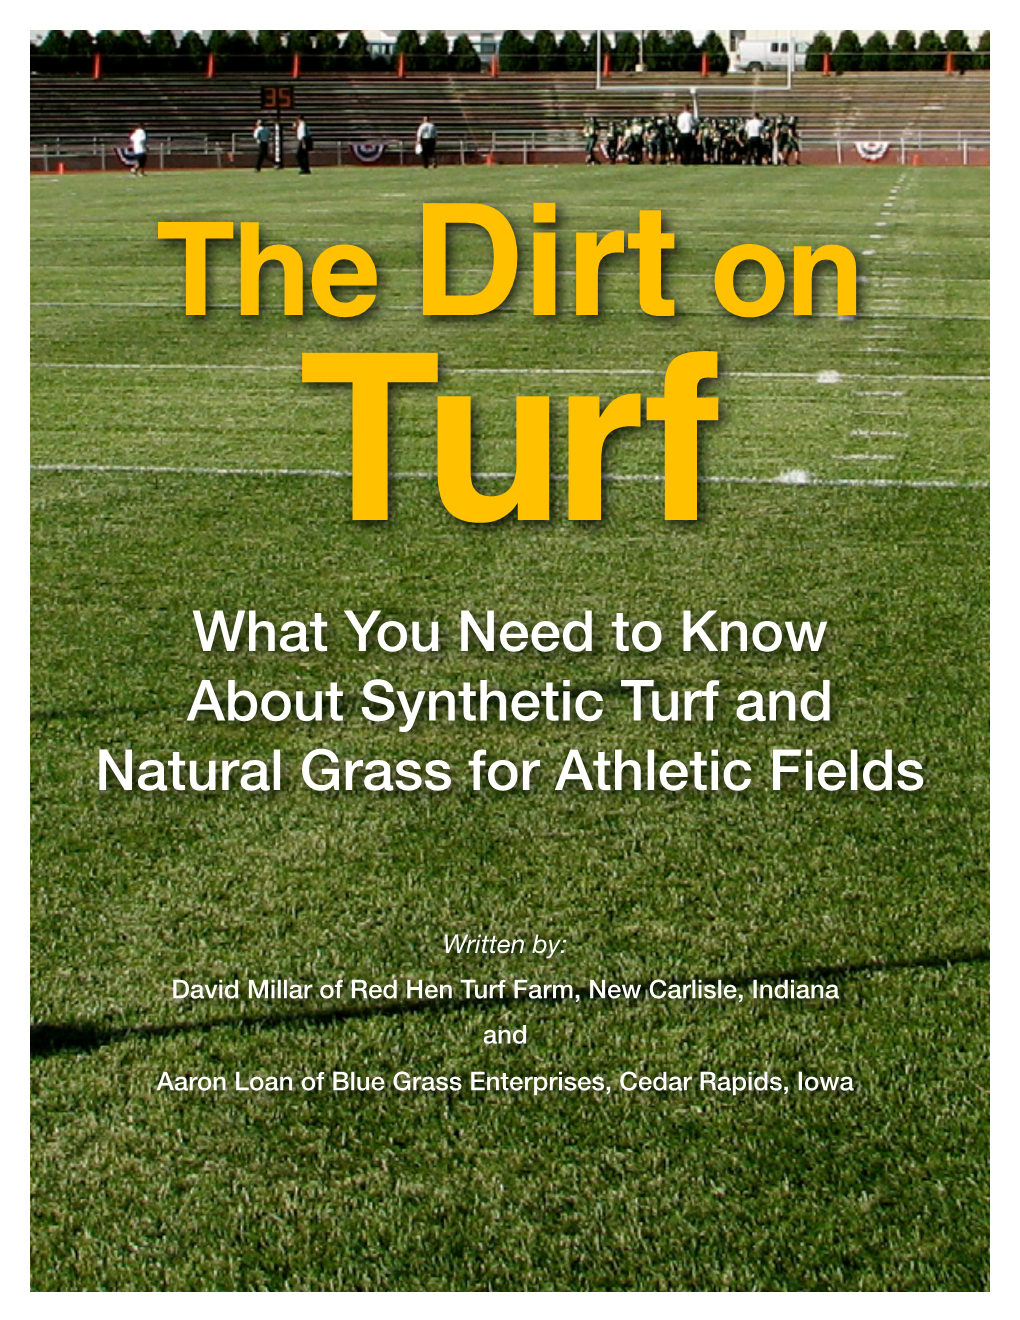 What You Need to Know About Synthetic Turf and Natural Grass for Athletic Fields